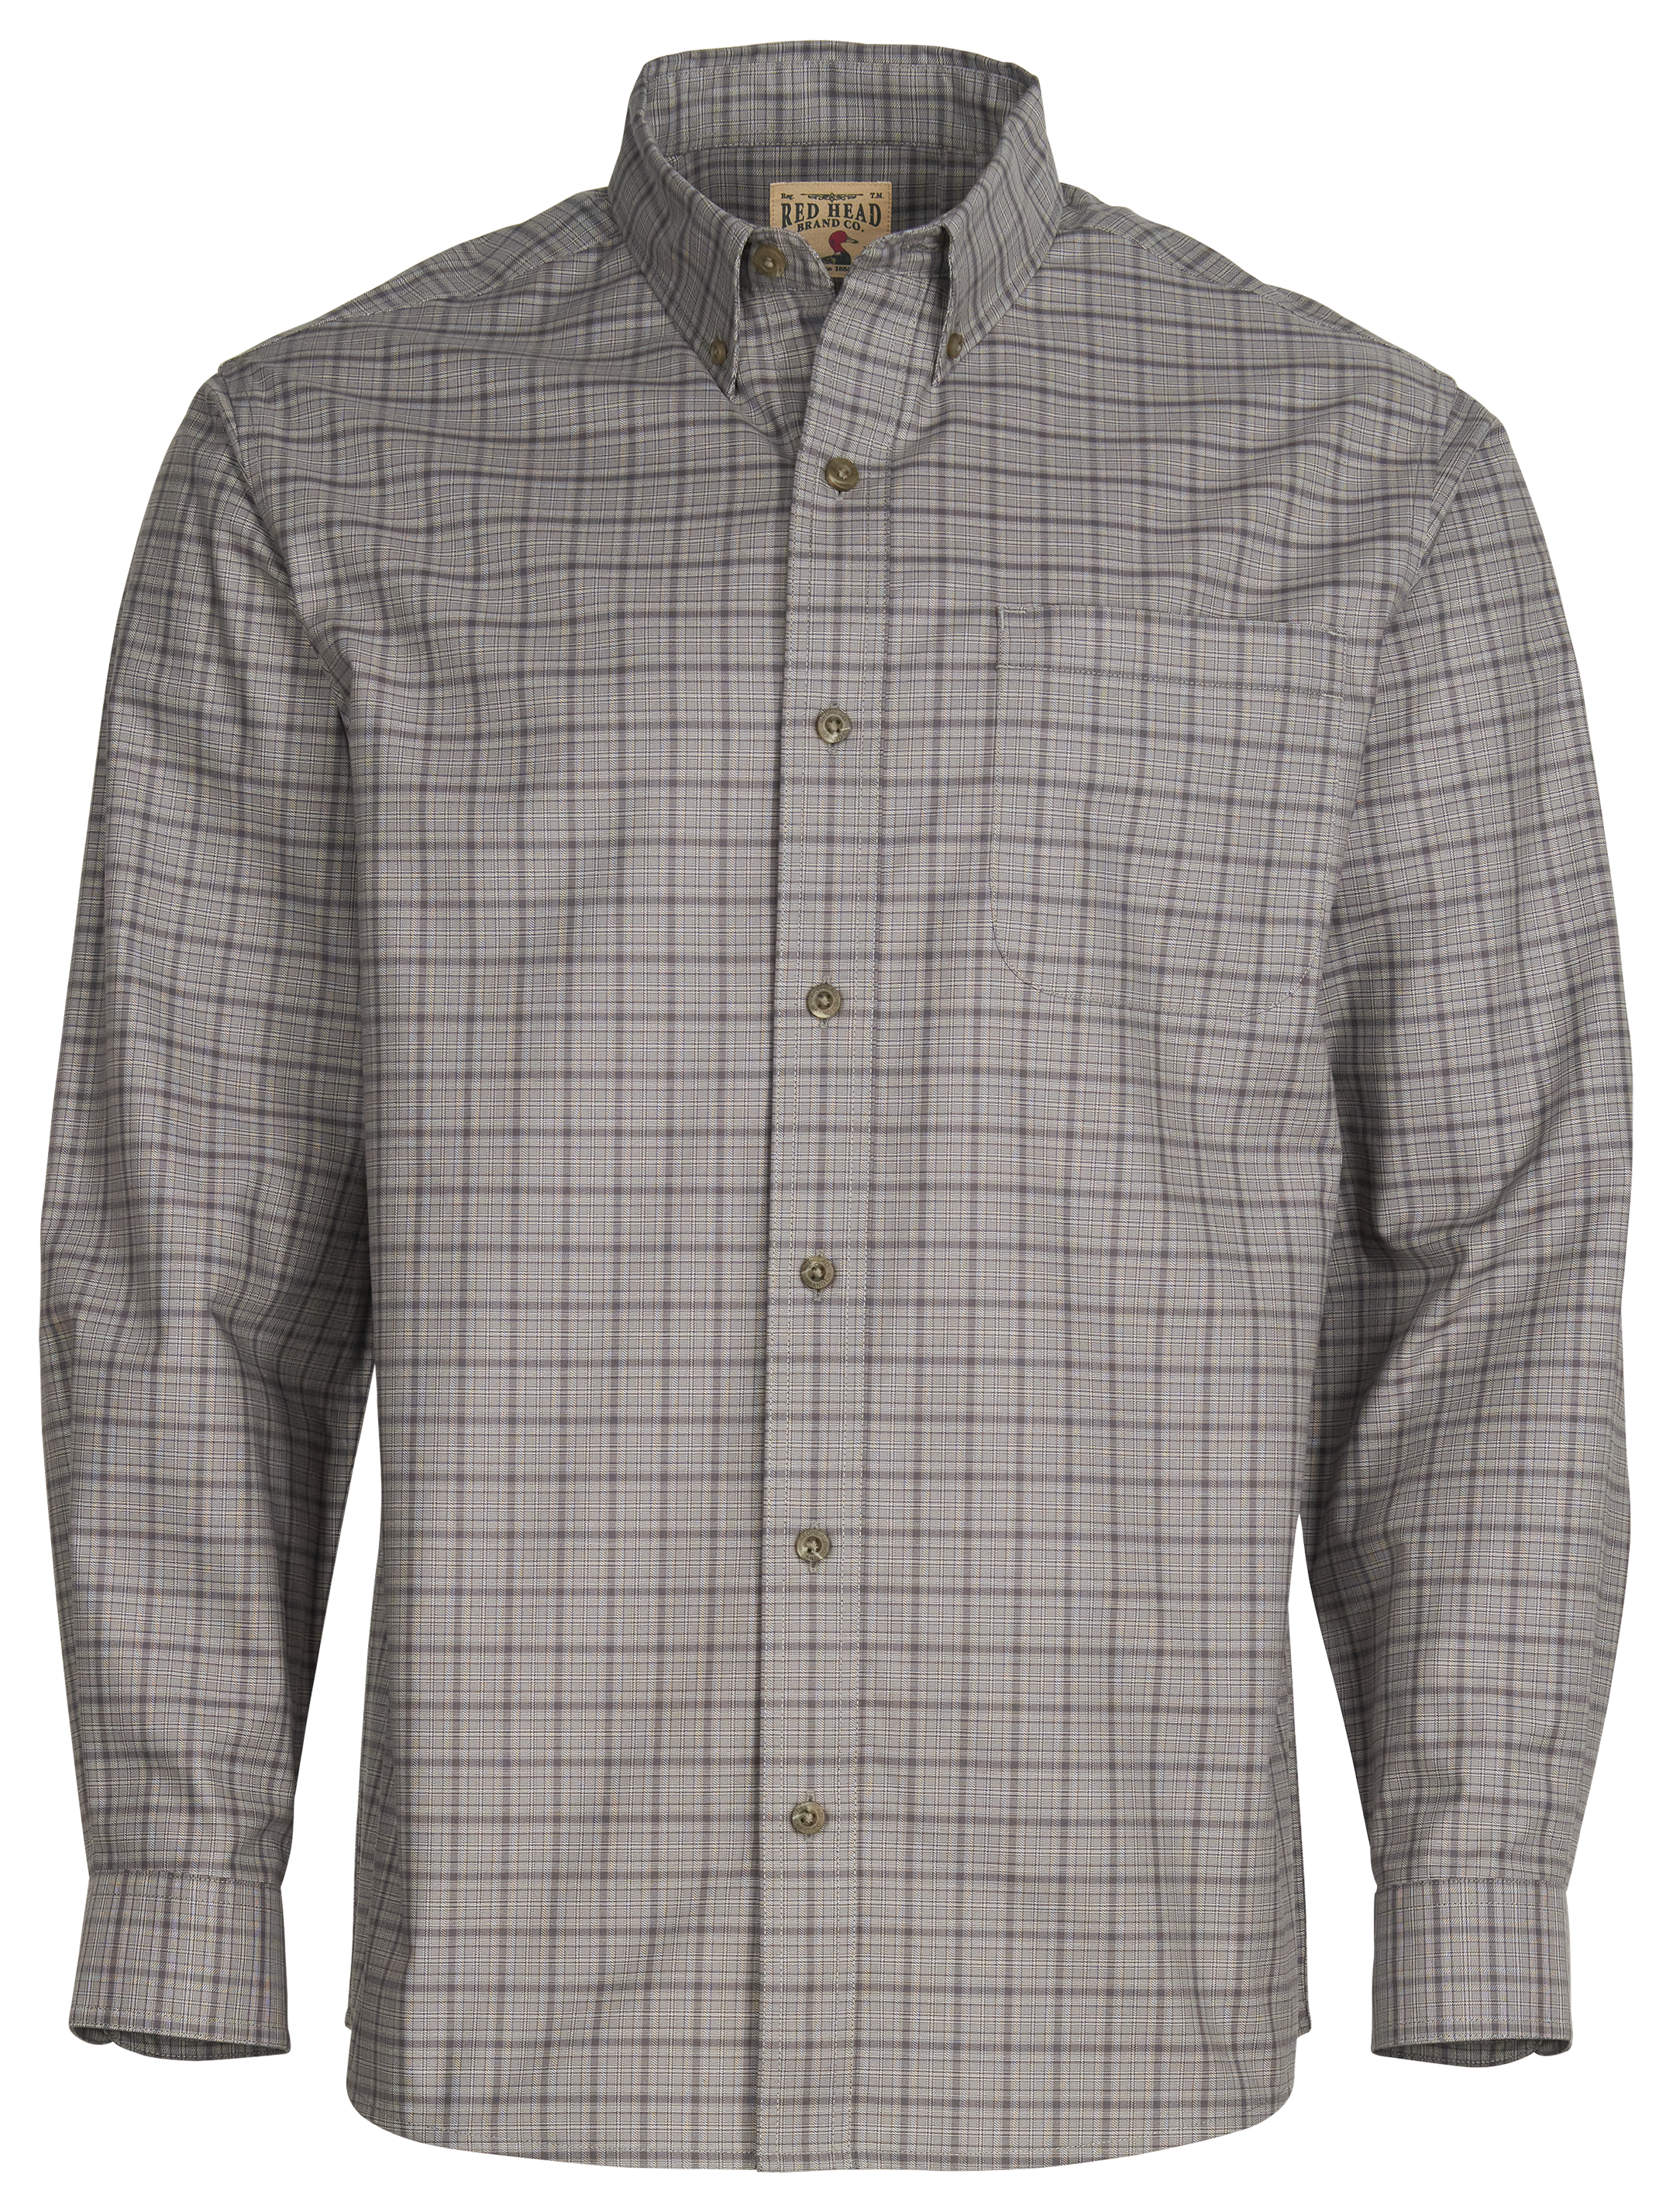 RedHead Outdoor Button-front Shirts for Men